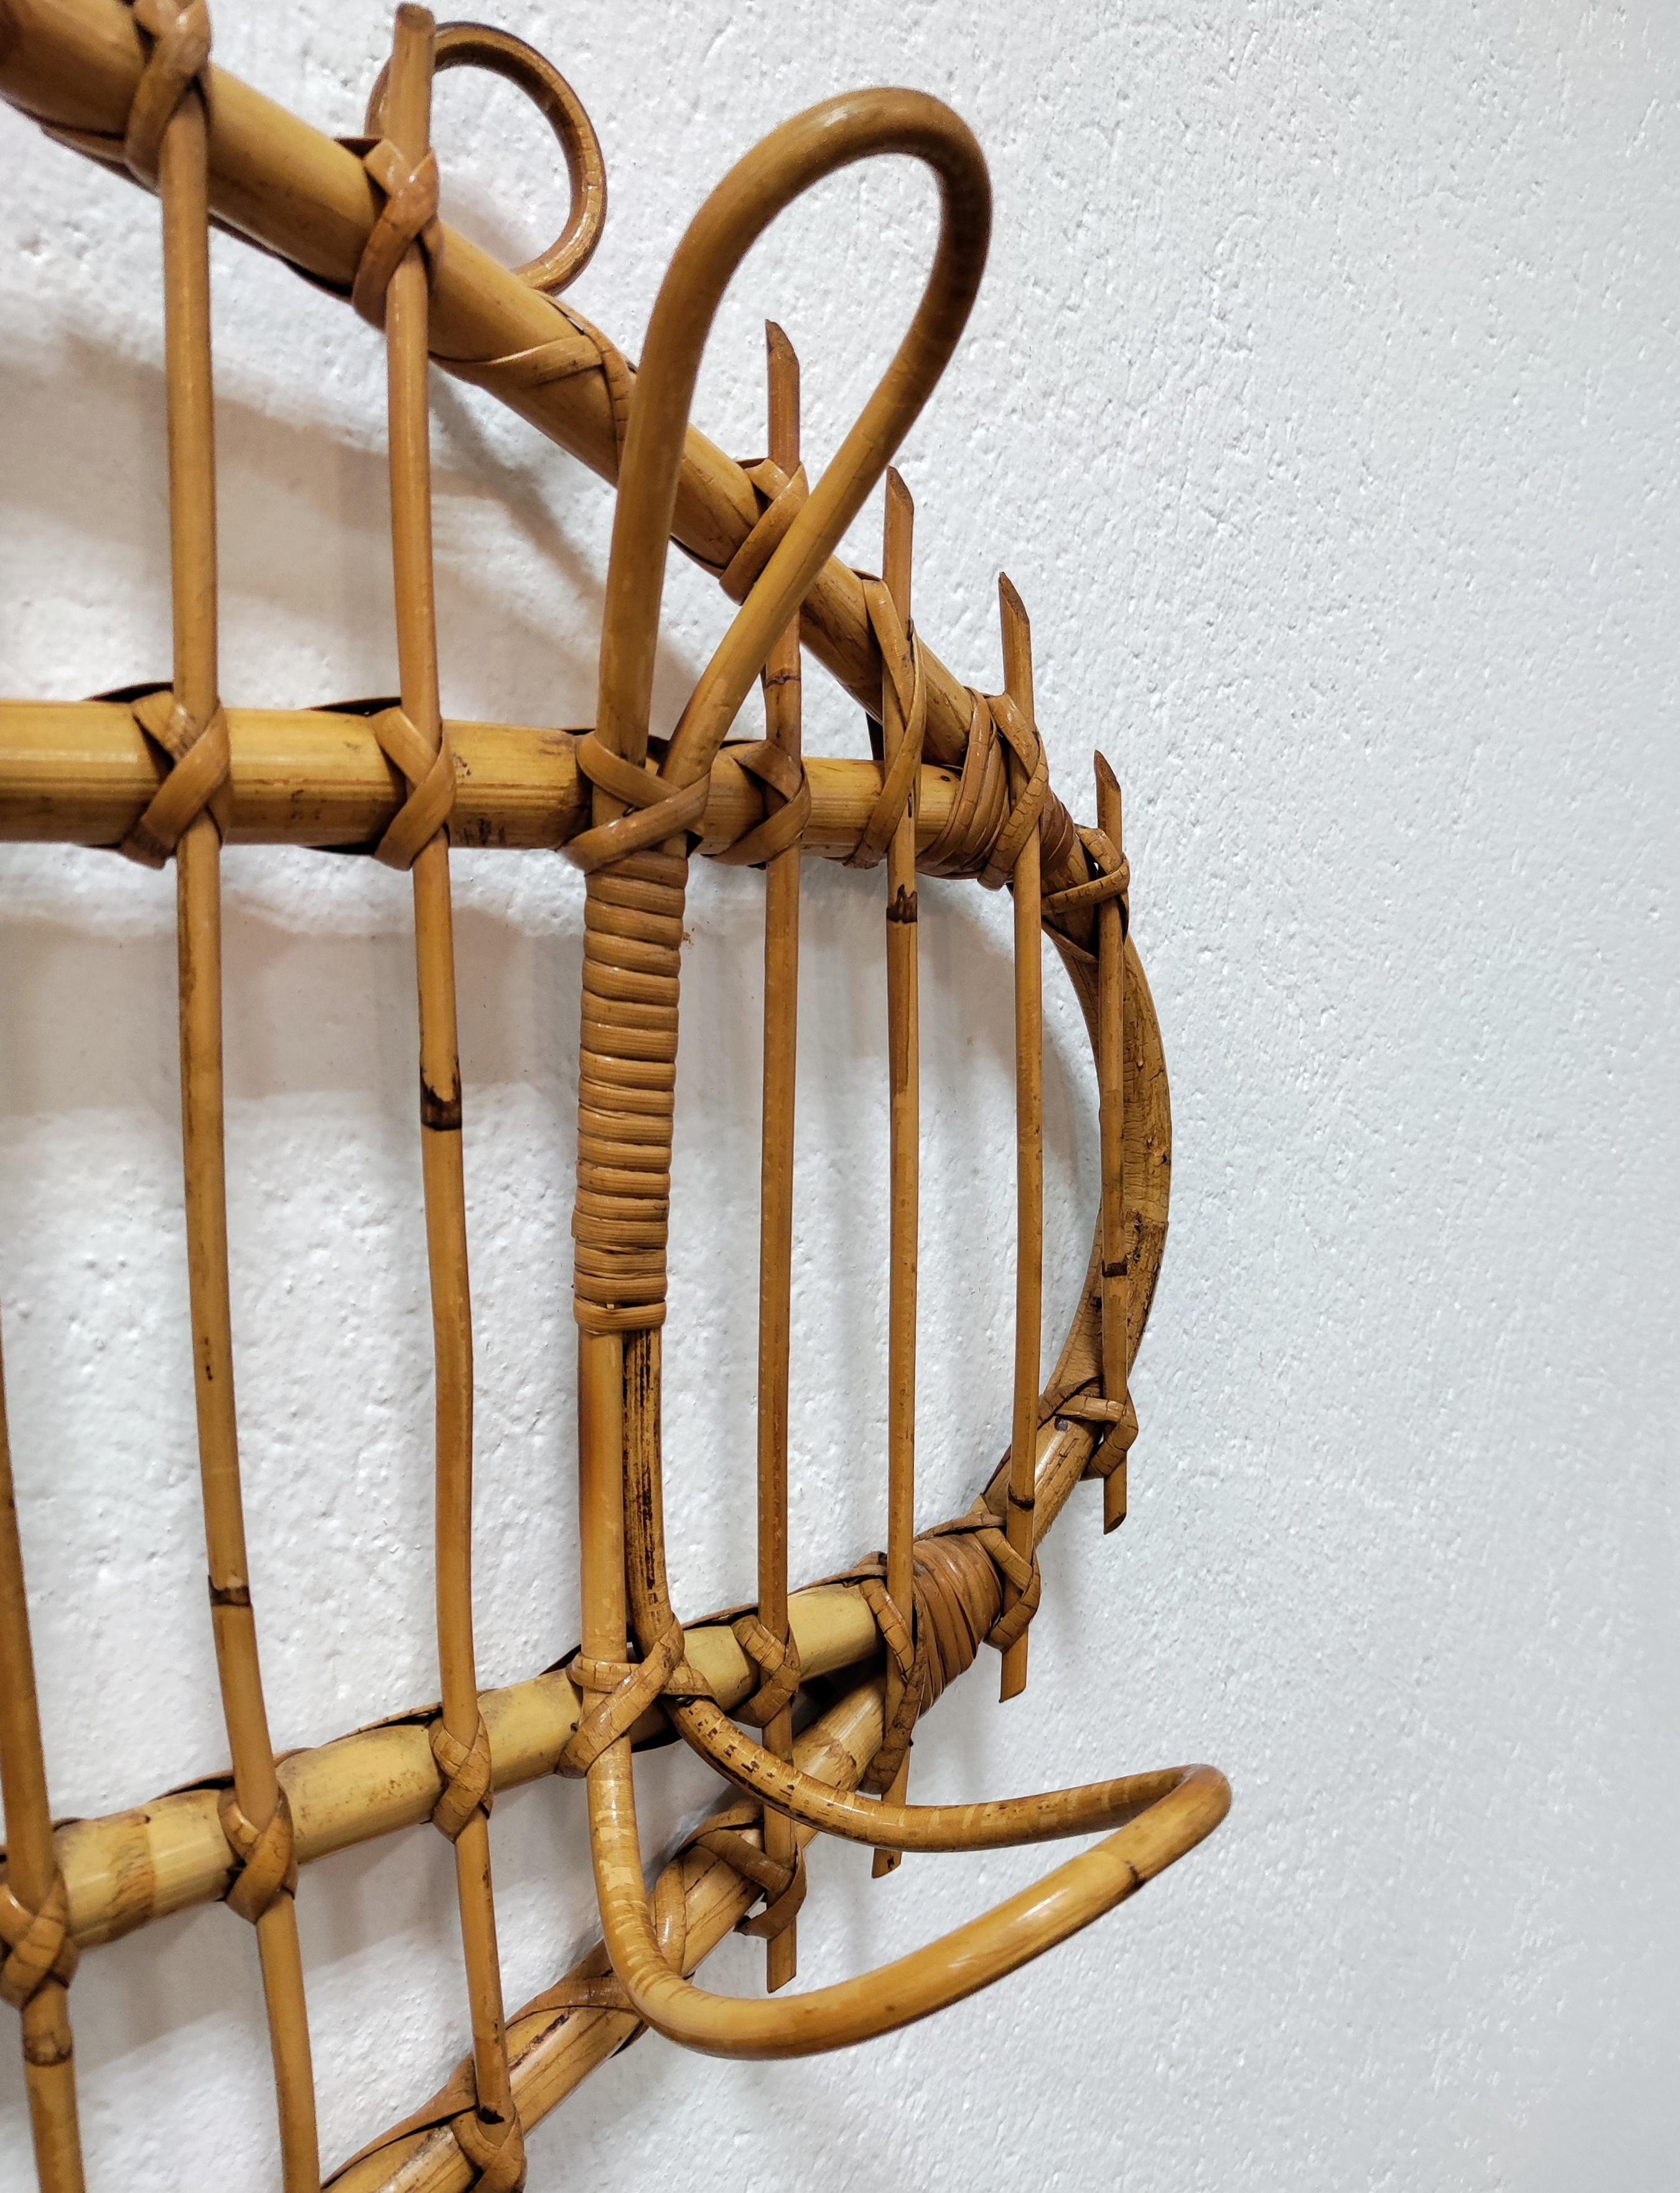 In this listing you will find a Mid-Century Modern oval vintage rattan wall coat hook designed by Franco Albini (attr). The coat hook was designed and manufactured in Italy in 1960s. The rattan hooks feature an oval shaped base with 6 hooks. The